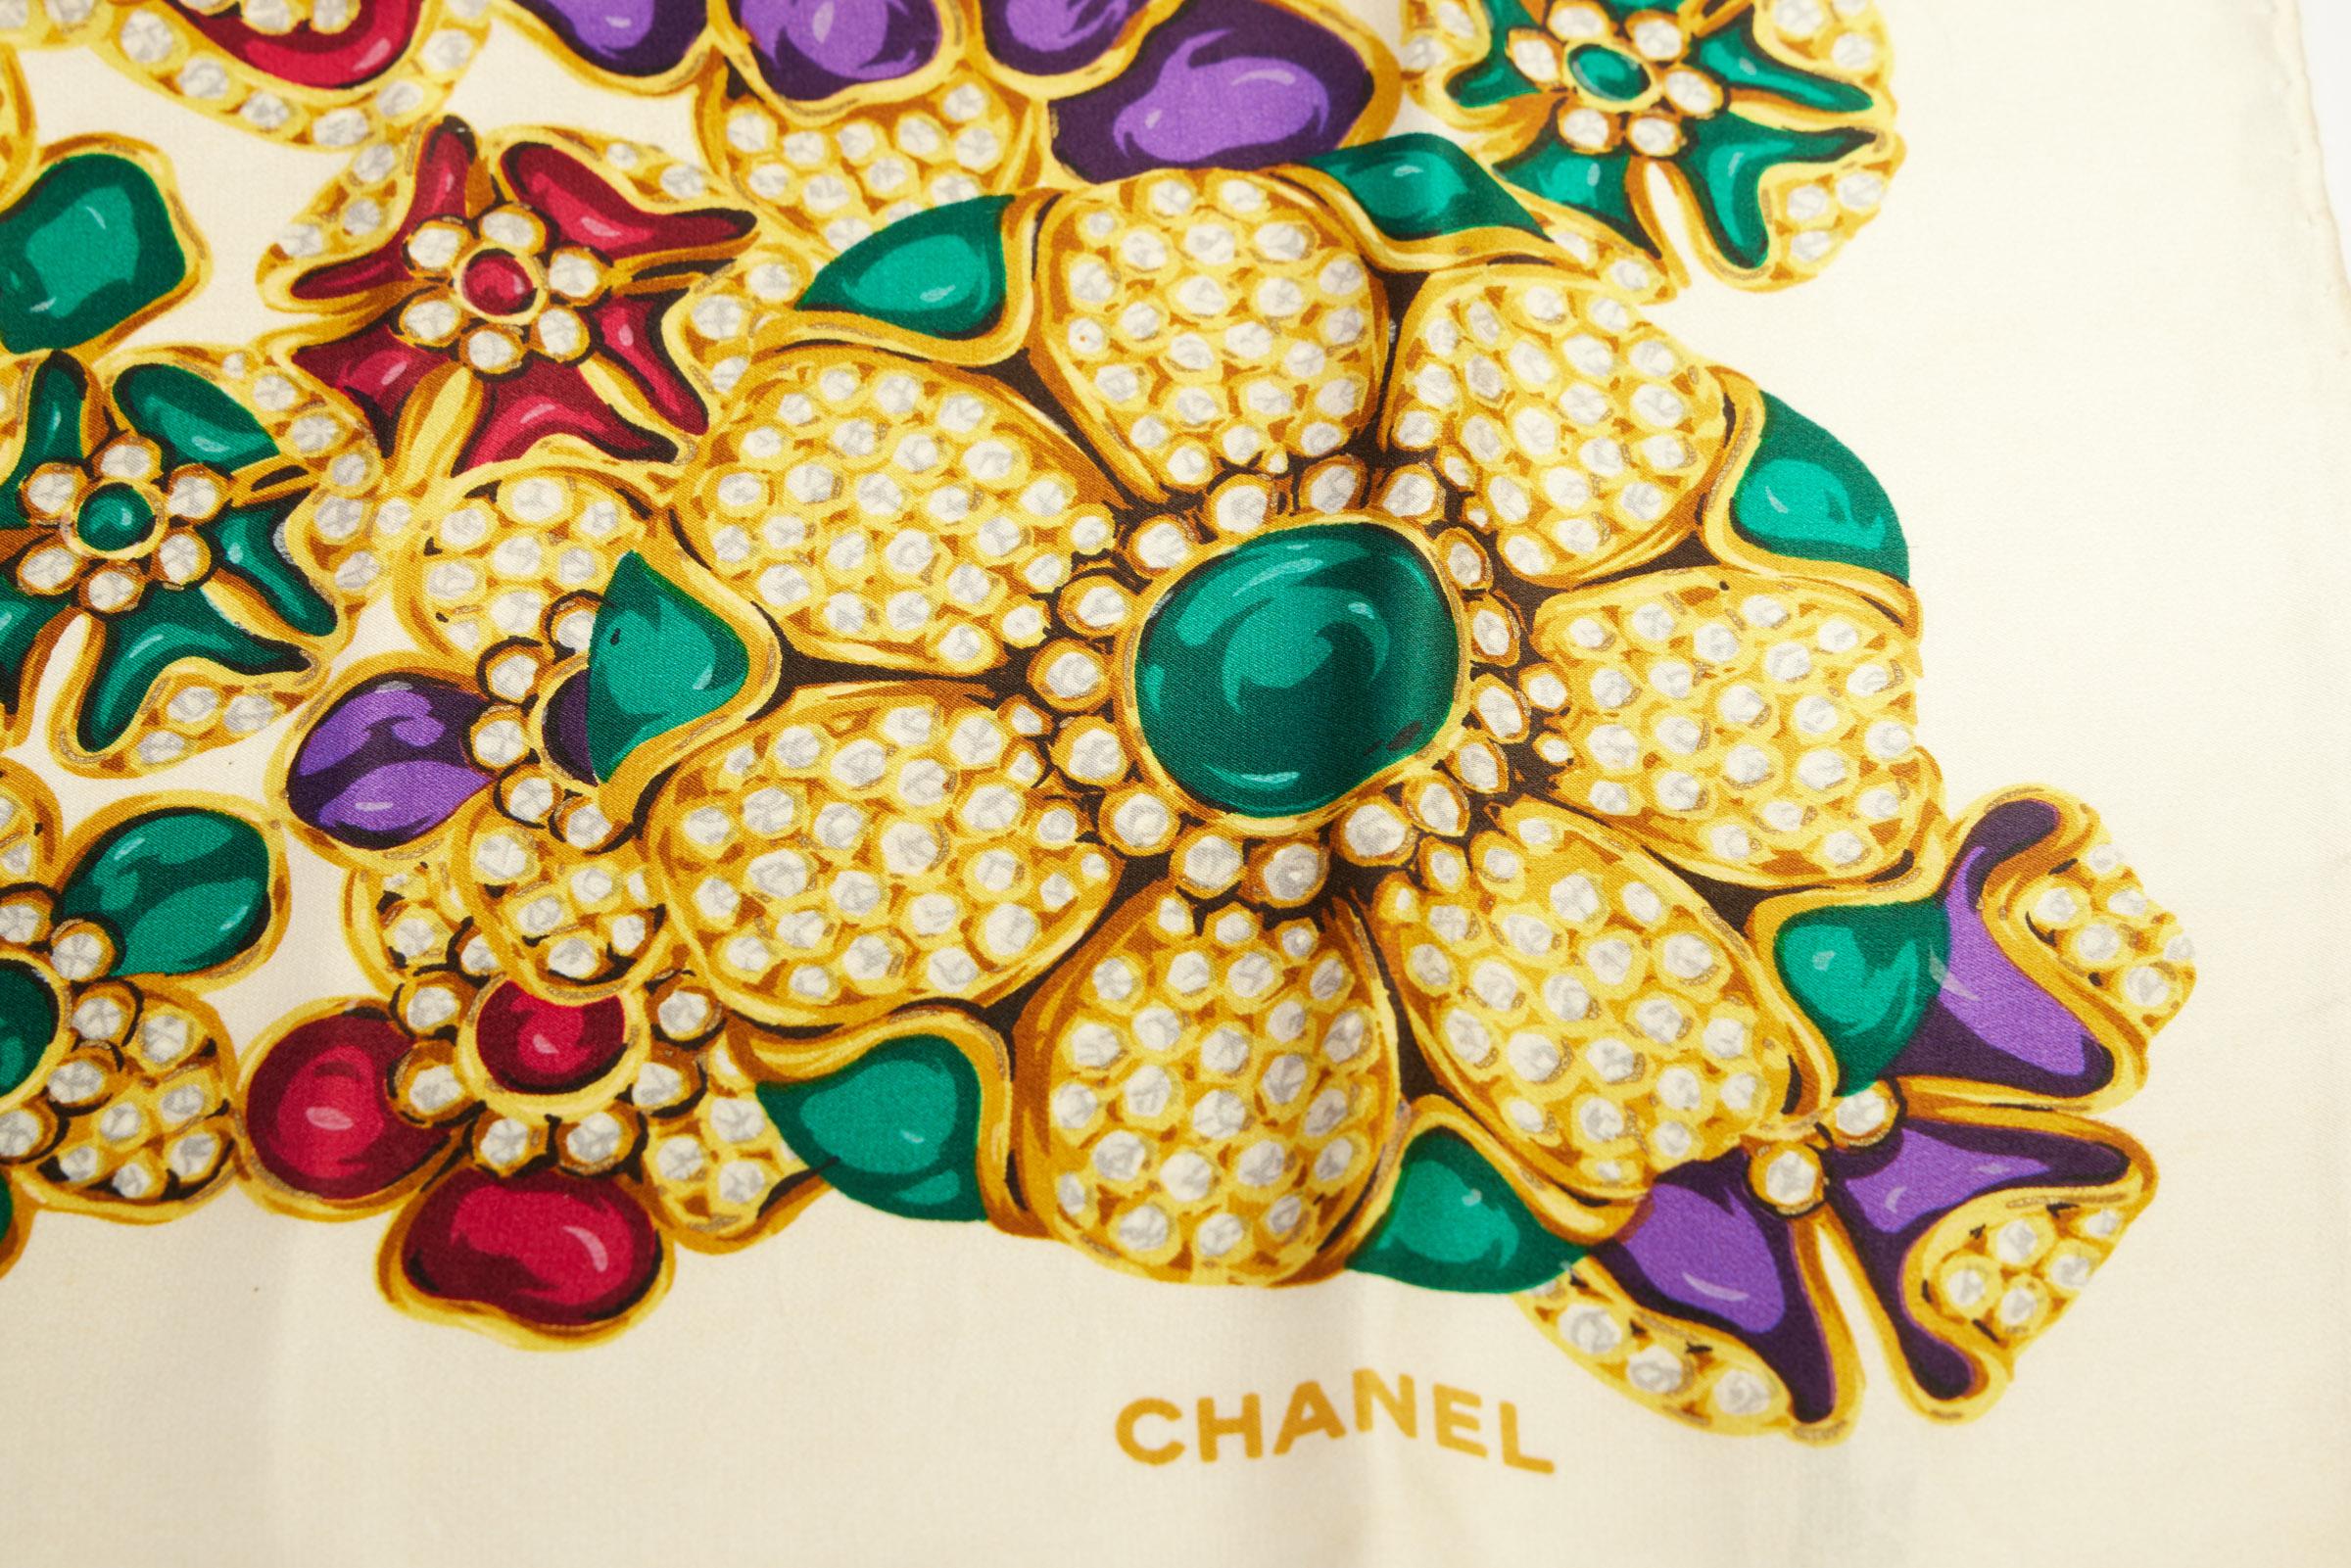 Chanel off white vintage silk scarf with gripoix jewelry design. Minor darkening in the center, please refer to photos. Original care tag.